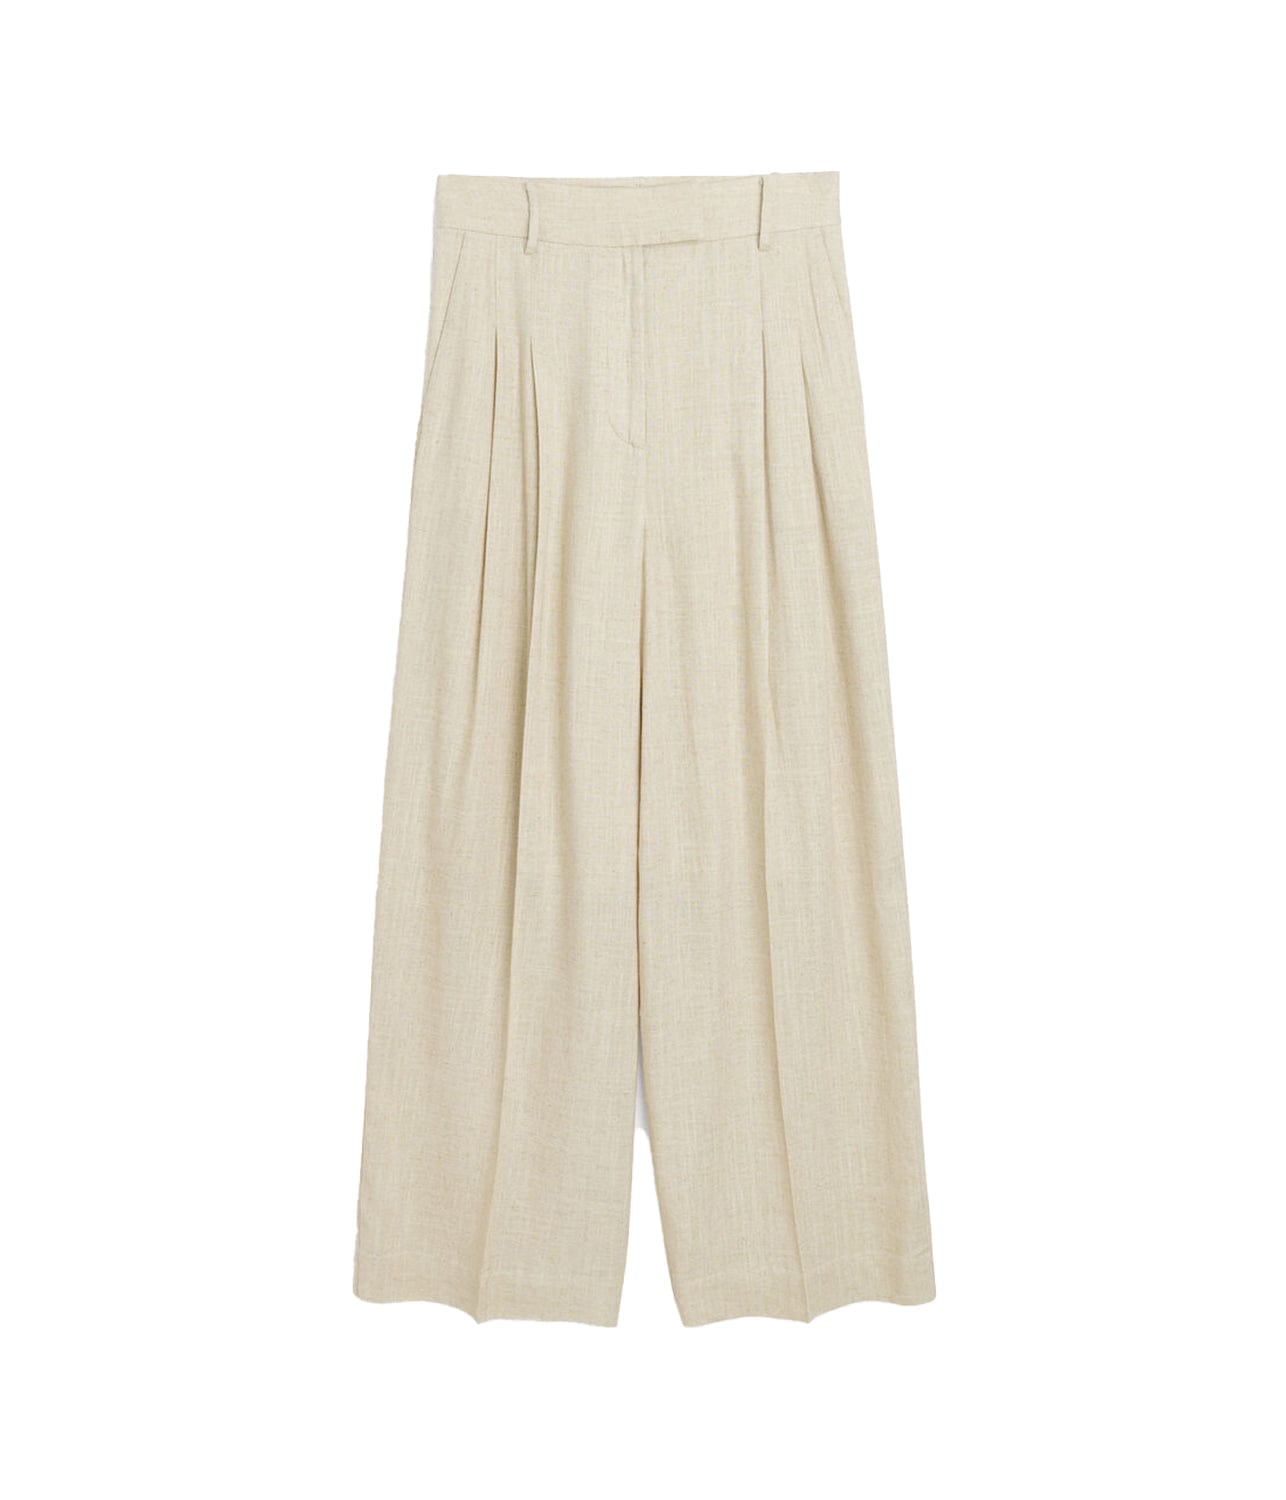 CYMBARIA PANTS- UNDYED | BY MALENE BIRGER |  BY MALENE BIRGER CYMBARIA PANTS- UNDYED